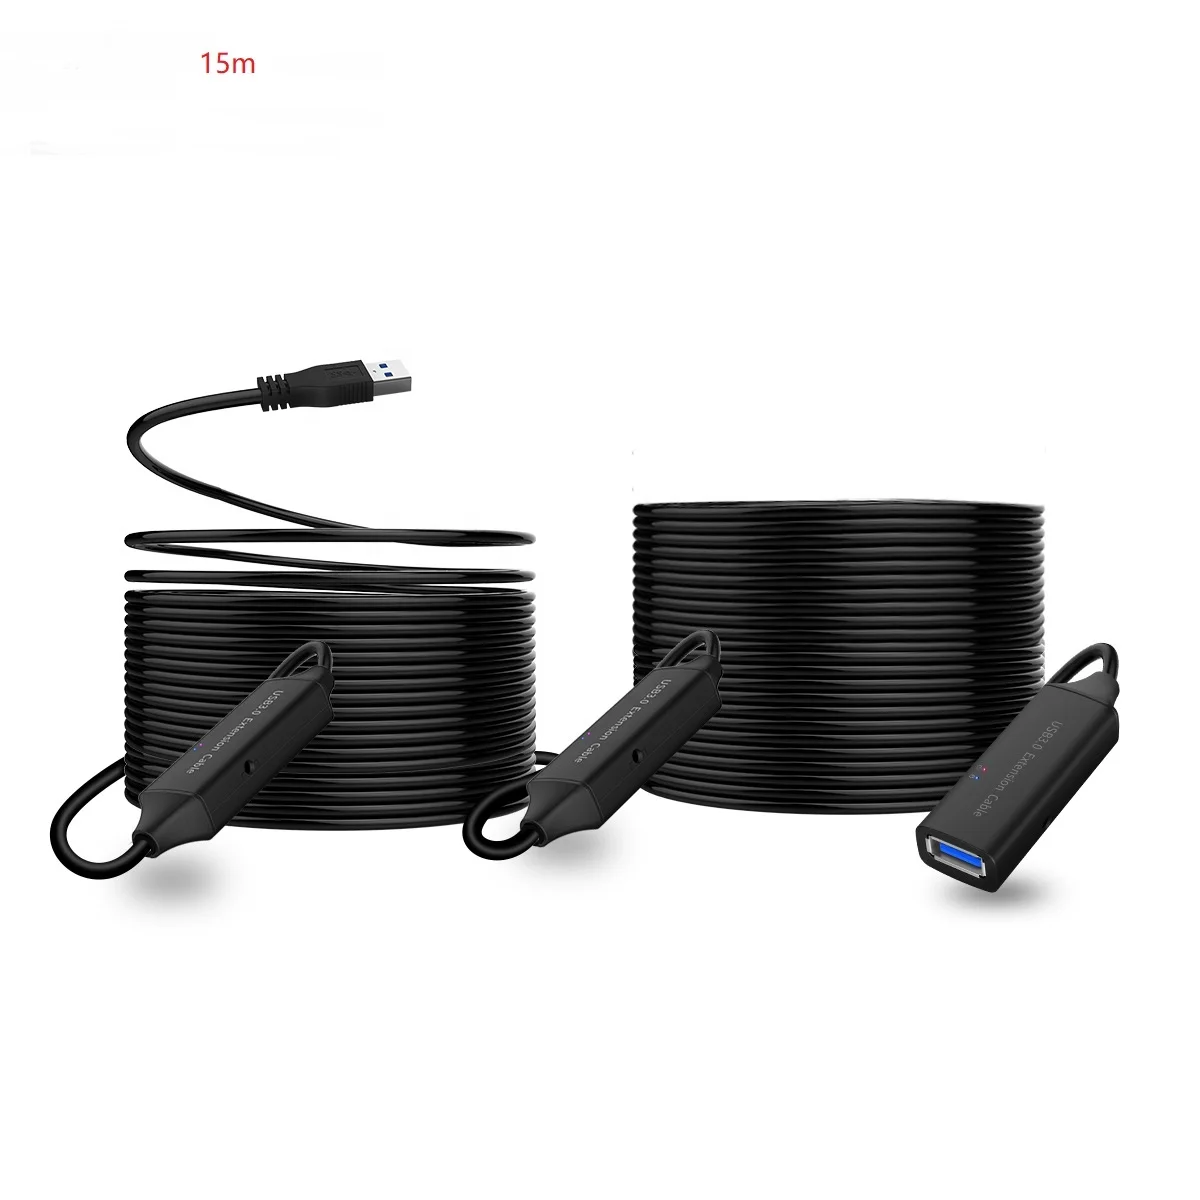 

Black usb 3.0 extension cable 15 meters IC RTS5411 with extra power supply in stock